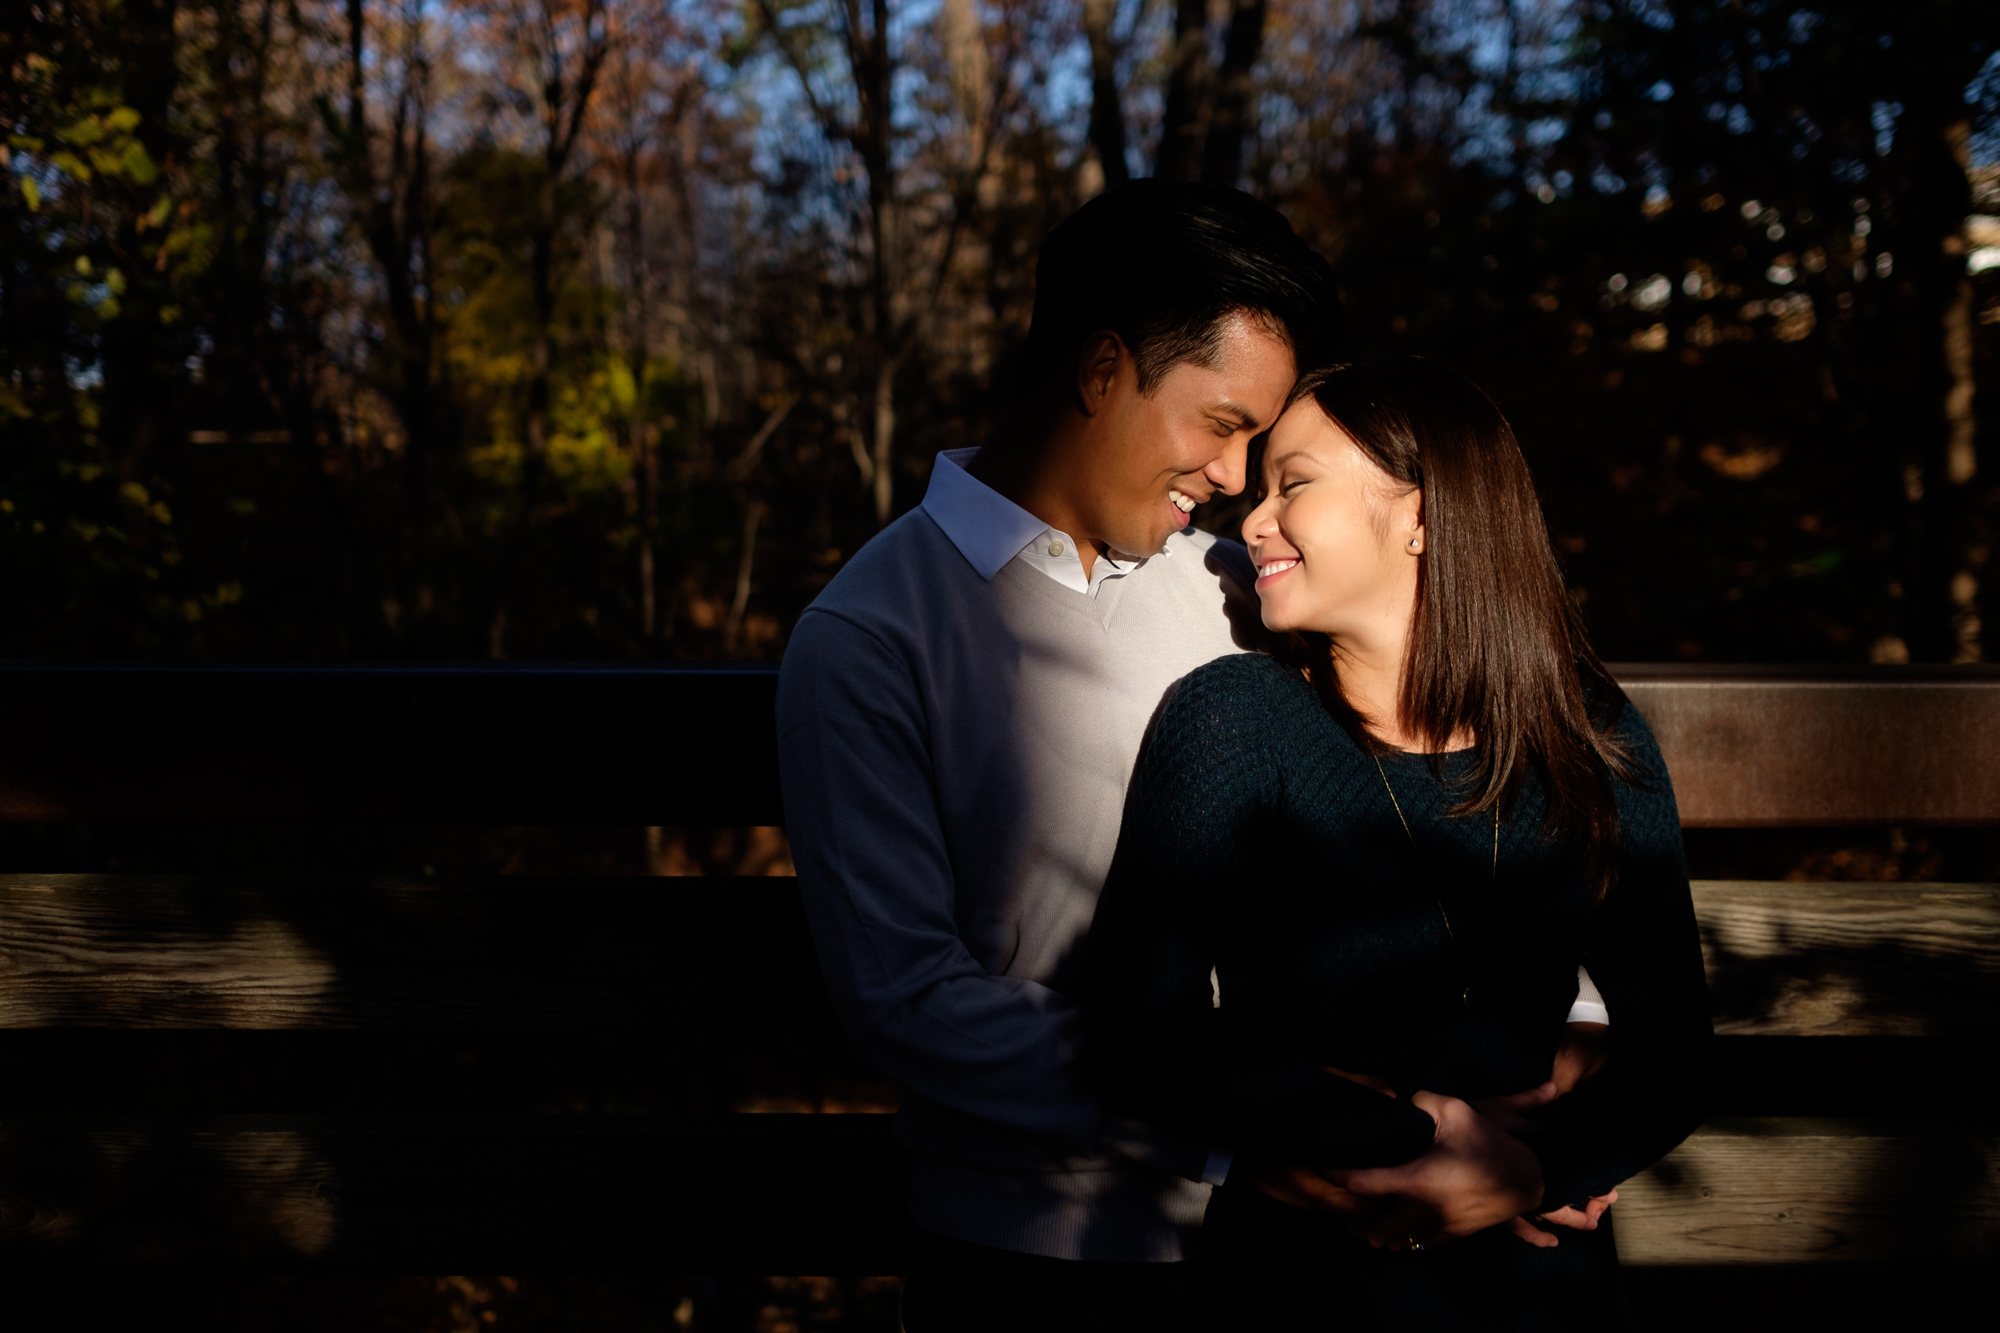  Haidie and Martin pose for some sunset portraits during their engagement session at Toronto's Edwards Gardens. 